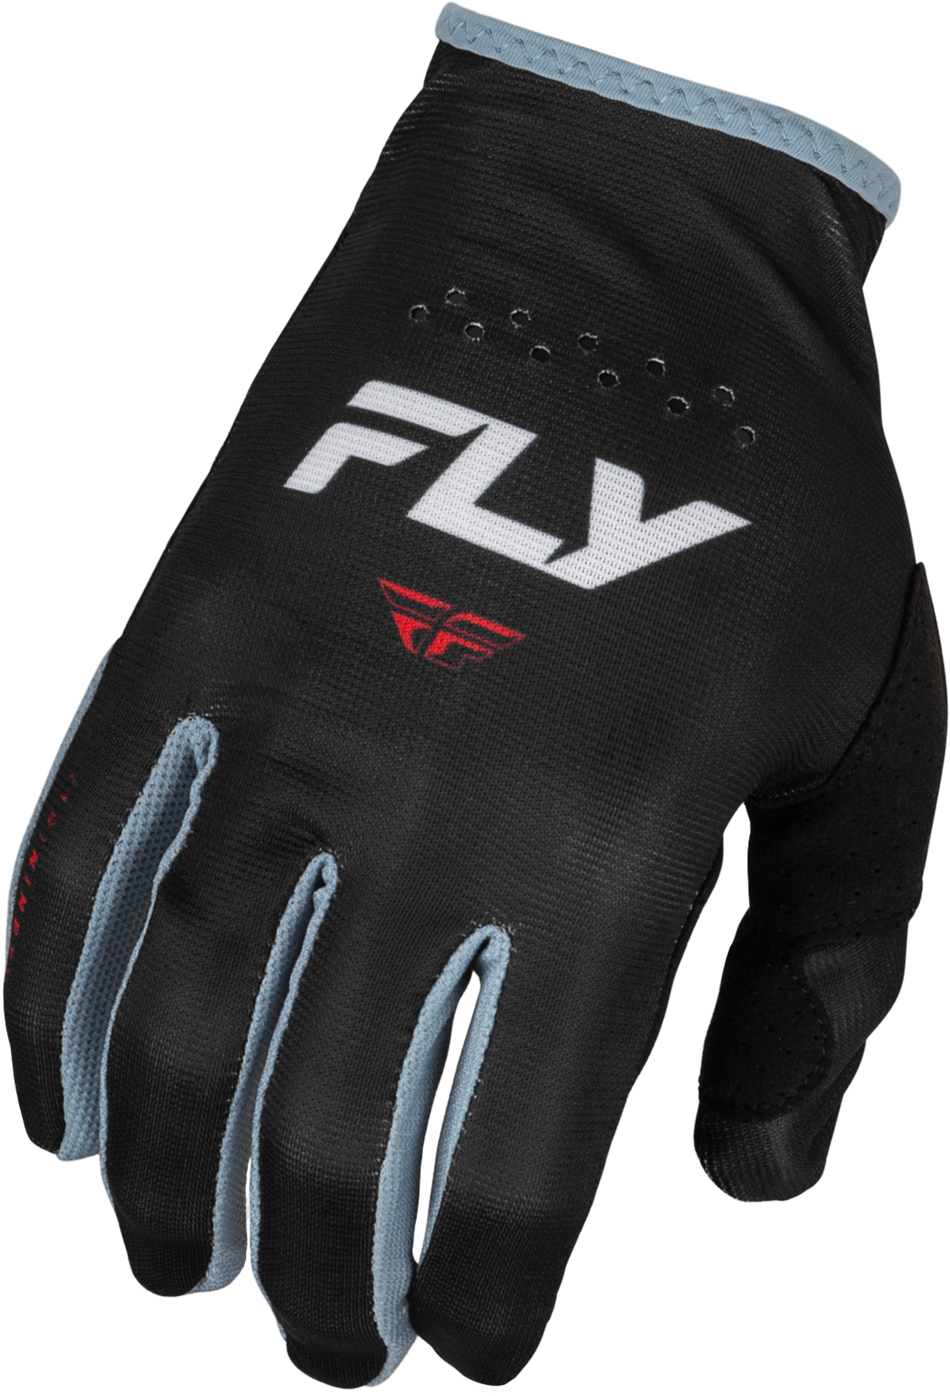 FLY RACING Youth Lite Gloves Black/White/Red Ys 377-710YS